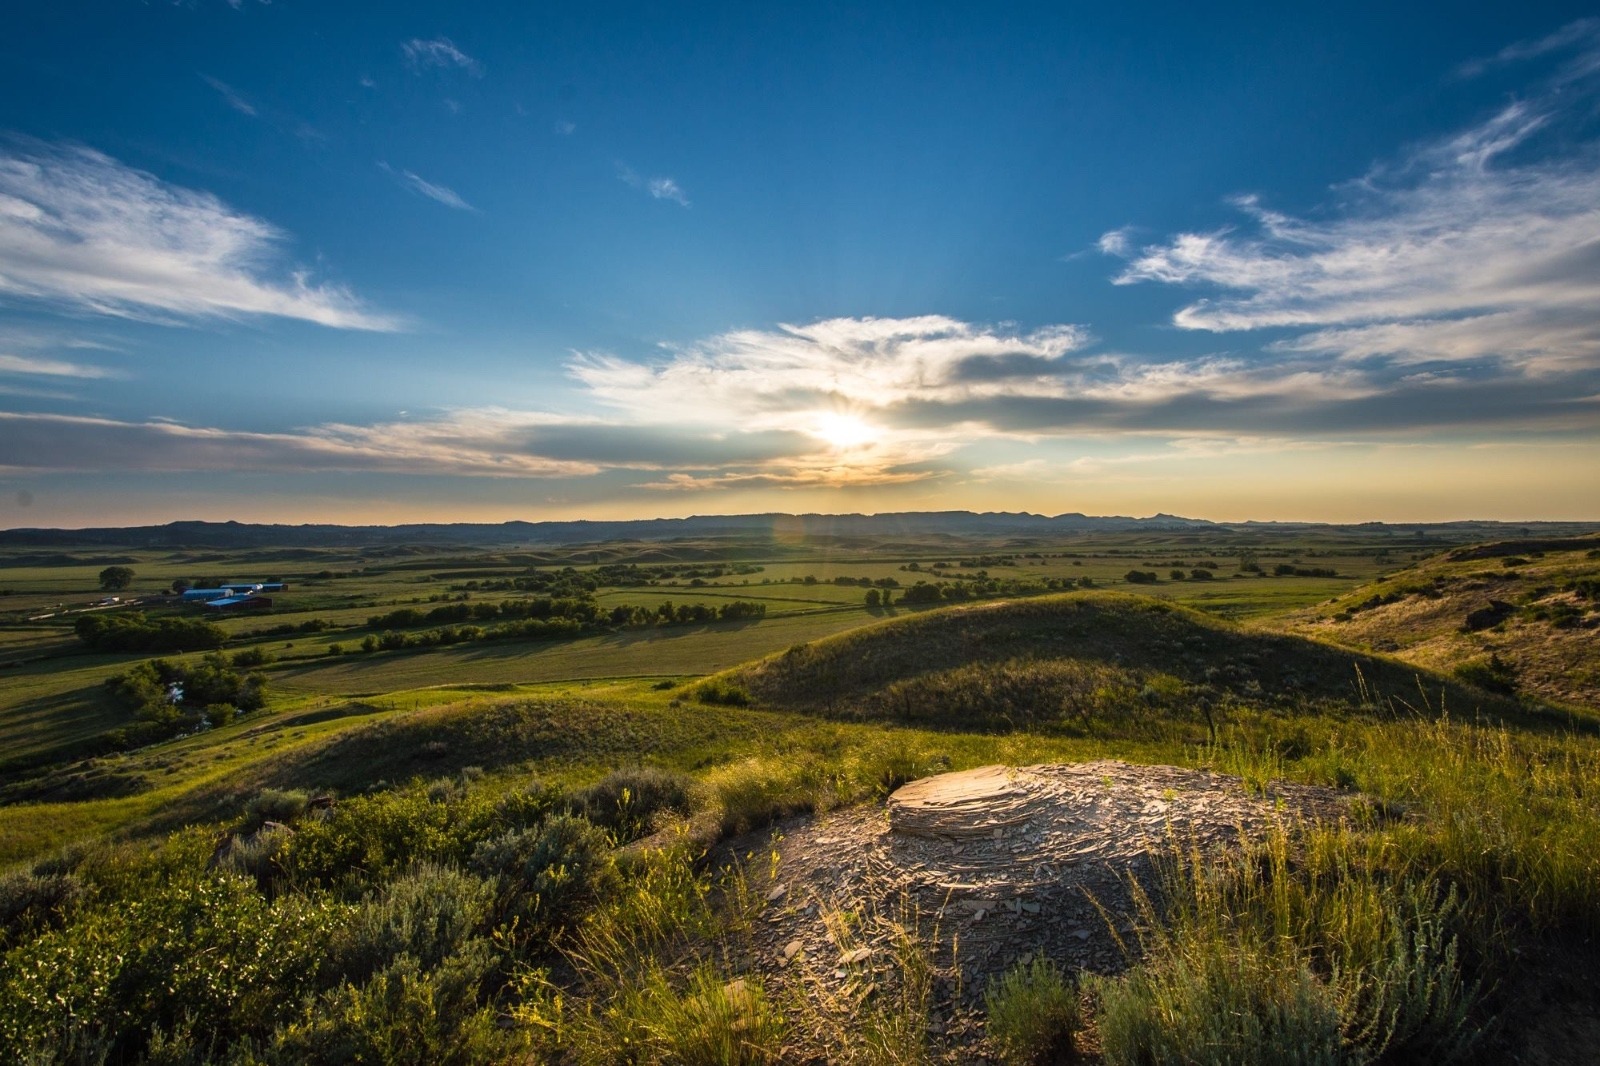 The high plains around Otter Creek, Montana, site of proposed expanded coal mining. Photo courtesy Alexis Bonogofsky